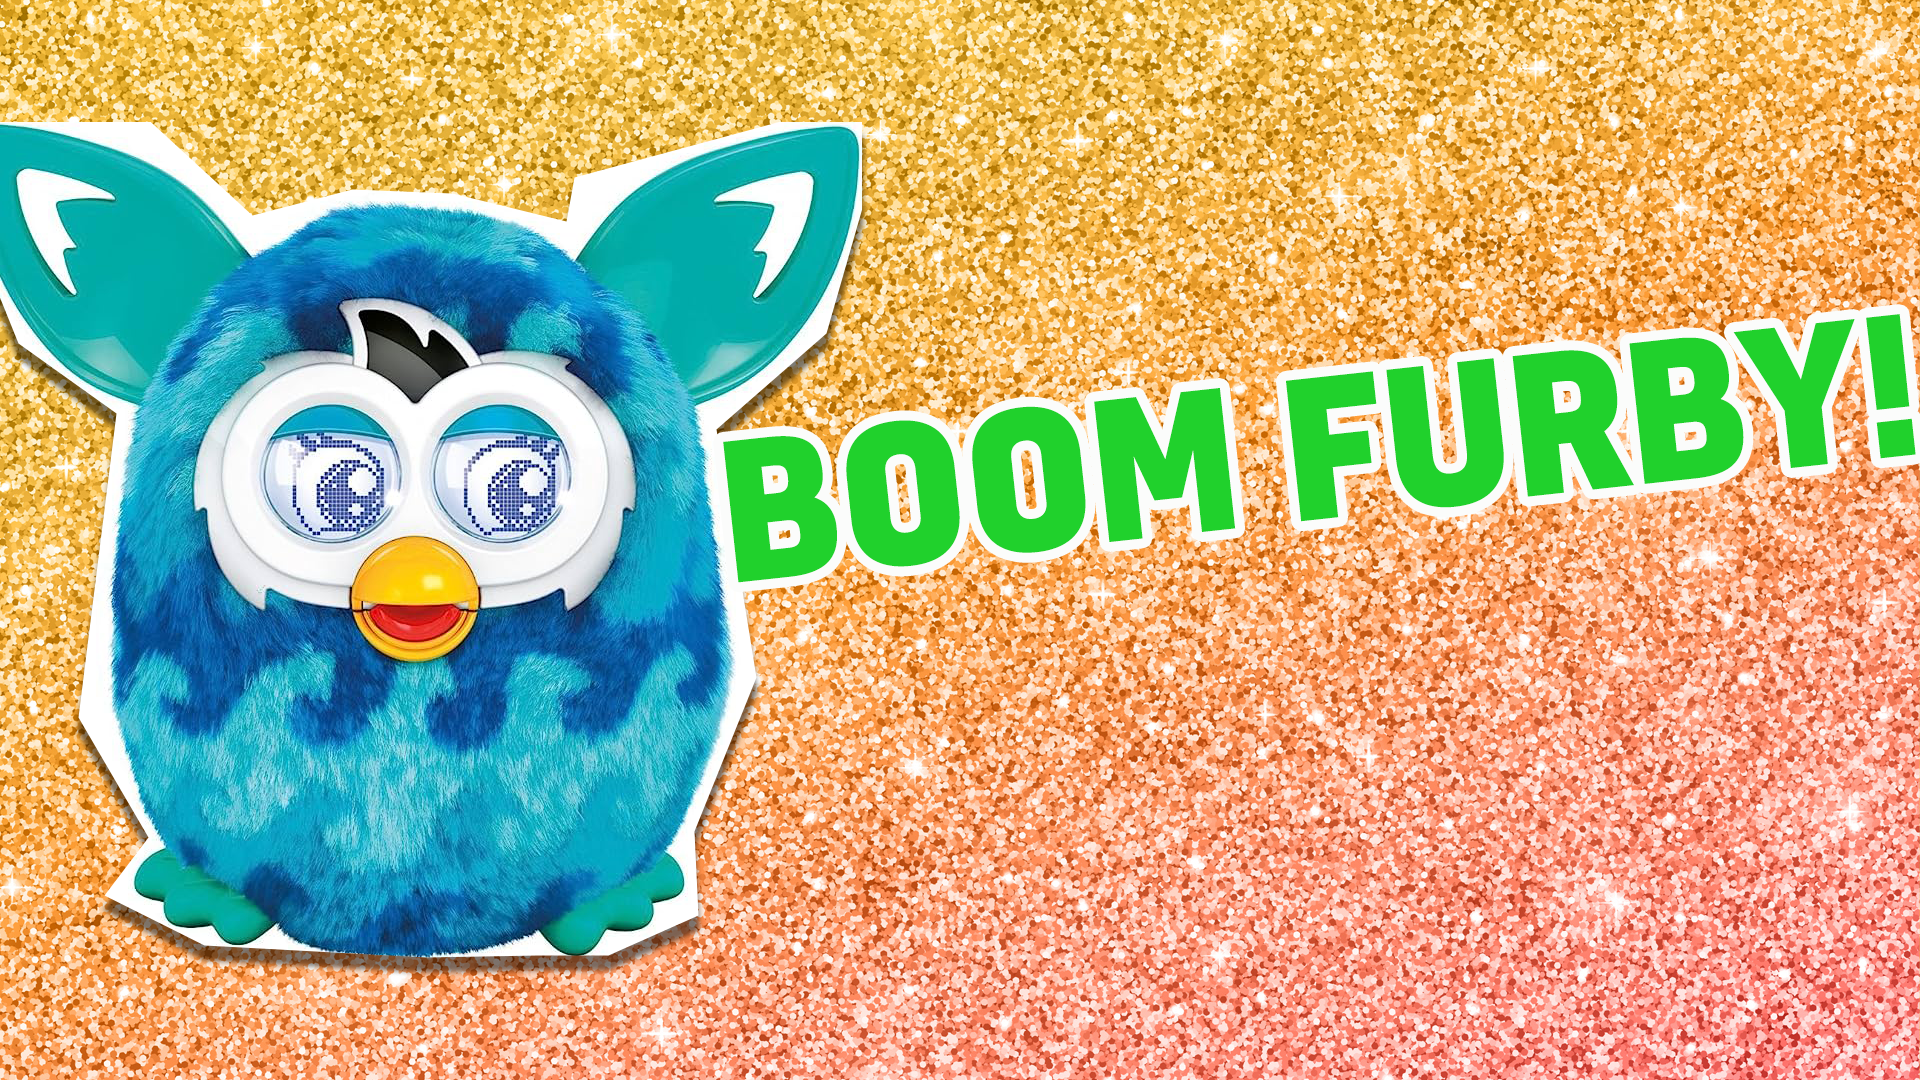 You're a Furby Boom! You combine the old and the new with your style! Your Tamagotchi-like pet app is really appealing to everyone, but you're also a classic Furby in many ways!